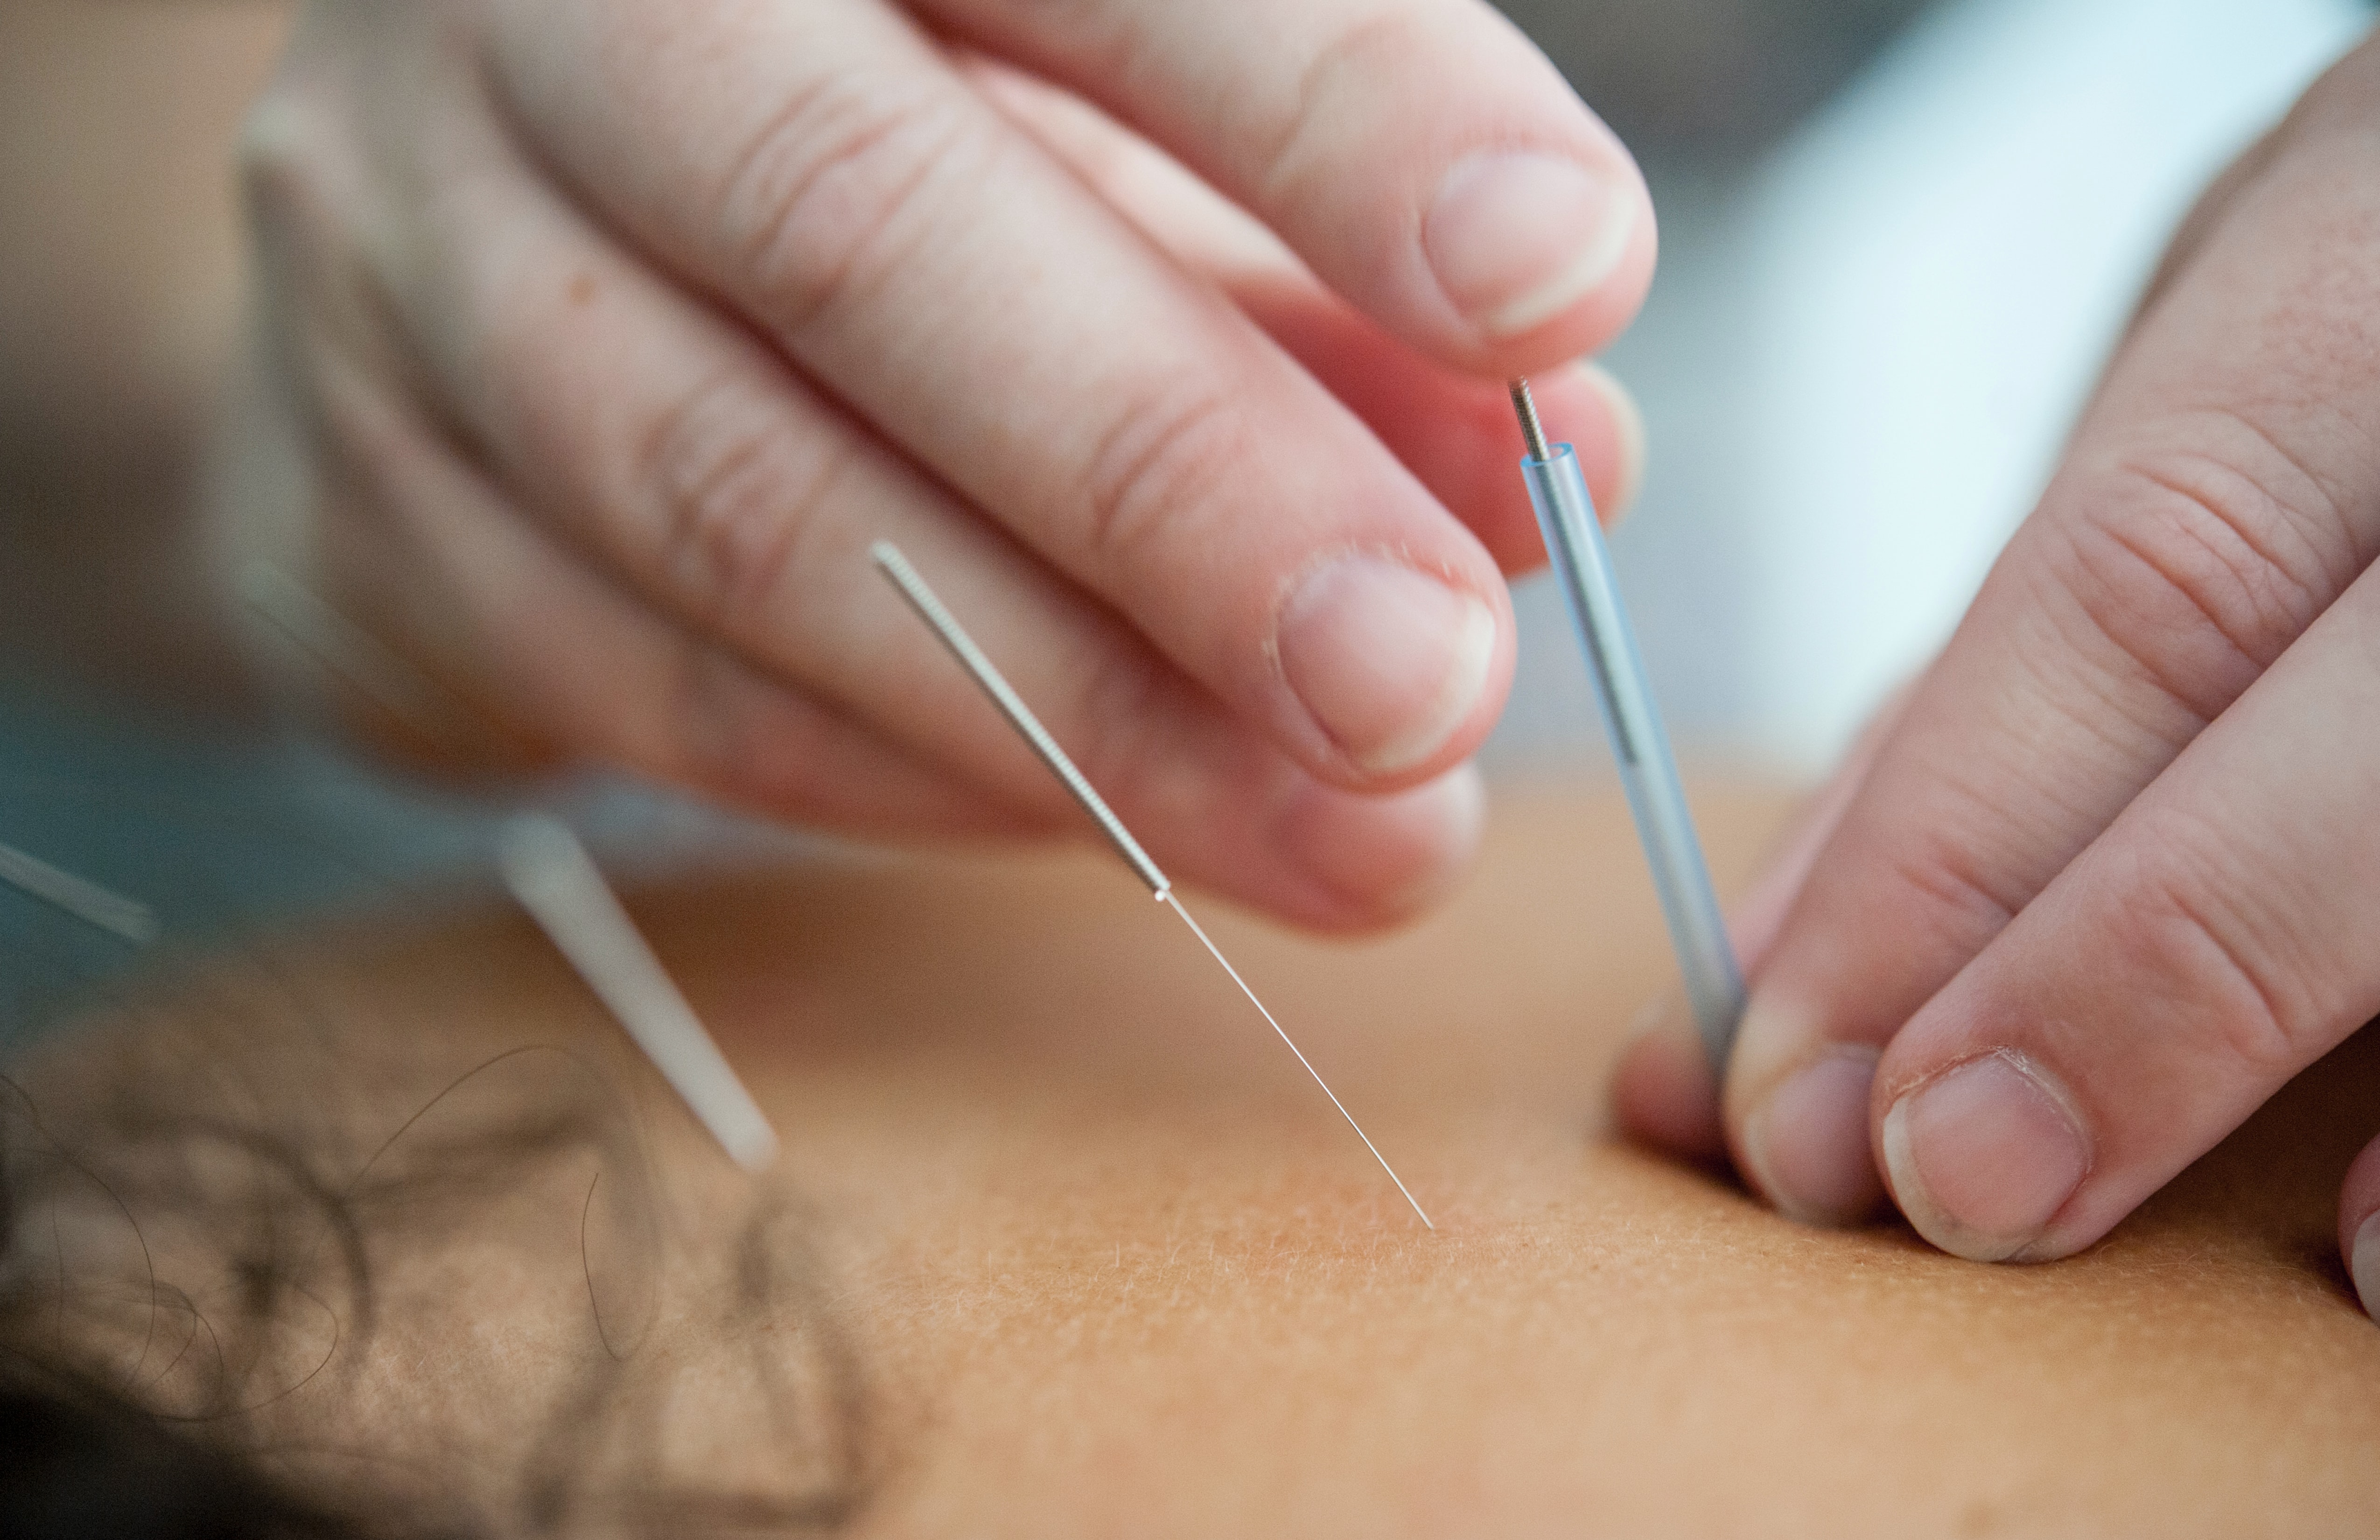 Can you acupuncture yourself?